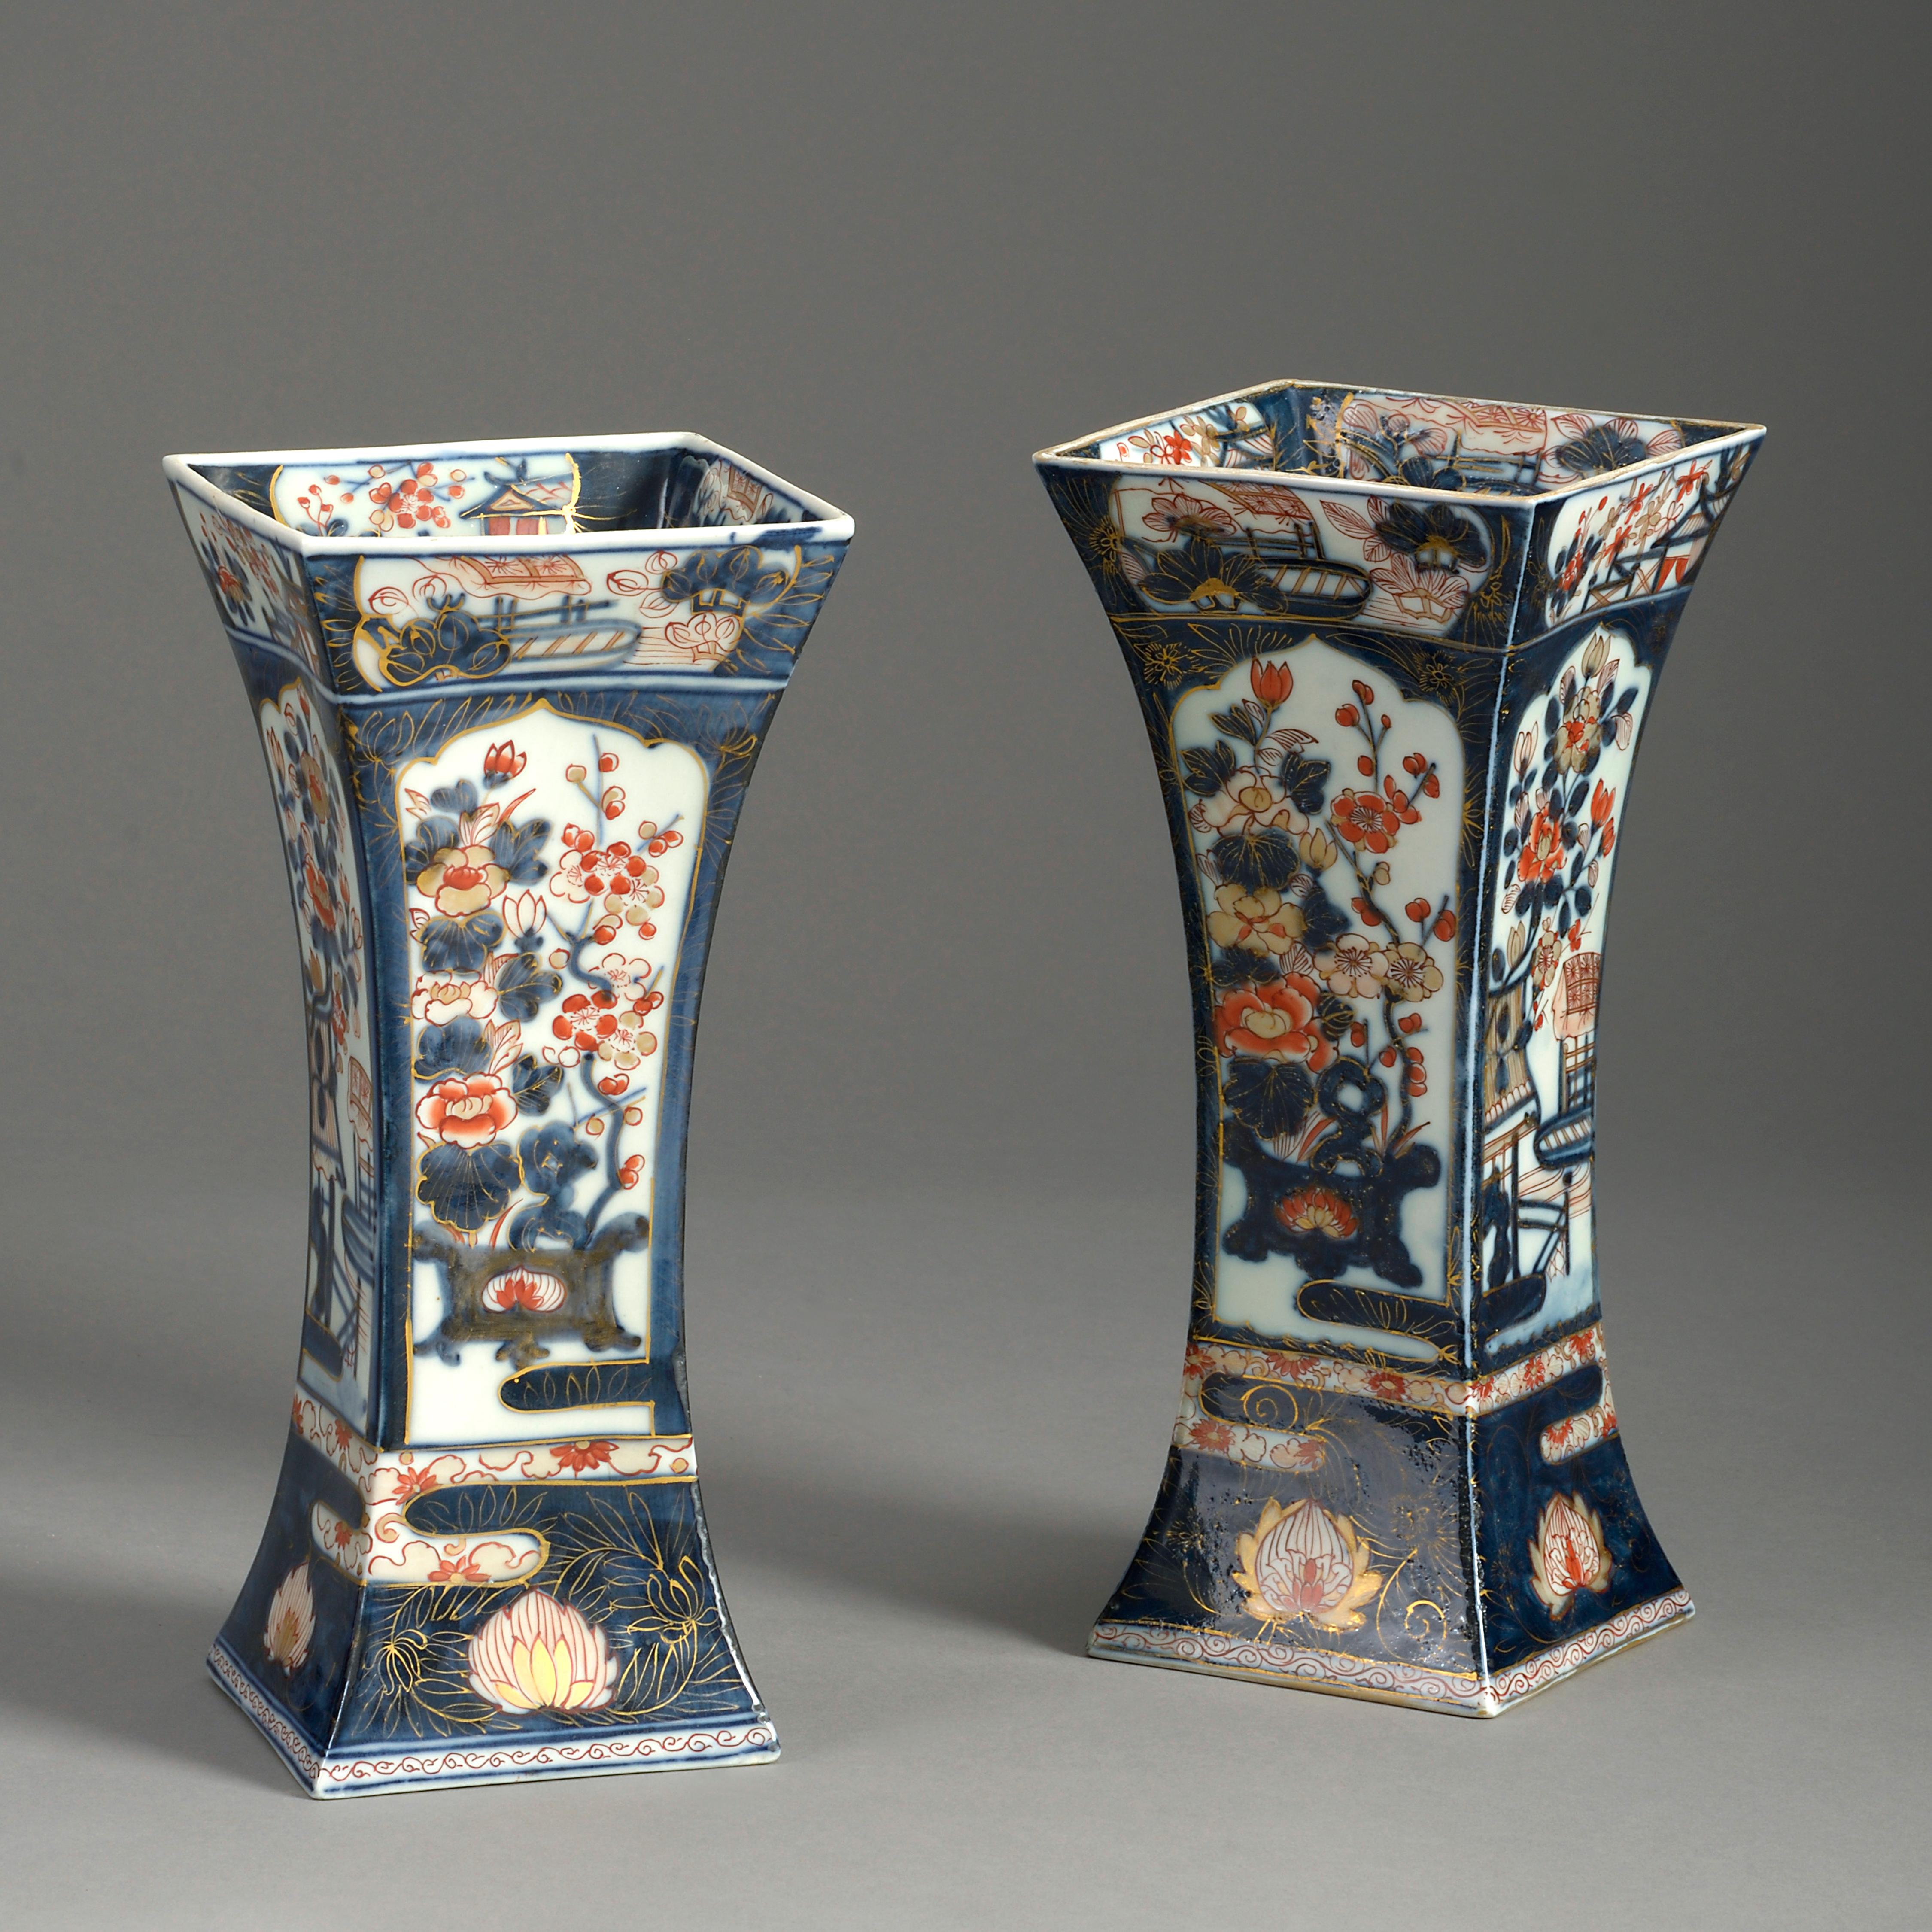 A nineteenth century matched garniture of three Samson Imari porcelain vases, including a baluster vase with cover, together with a pair of square trumpet form vases, all decorated in the traditional manner.

Dimensions listed refer to the single